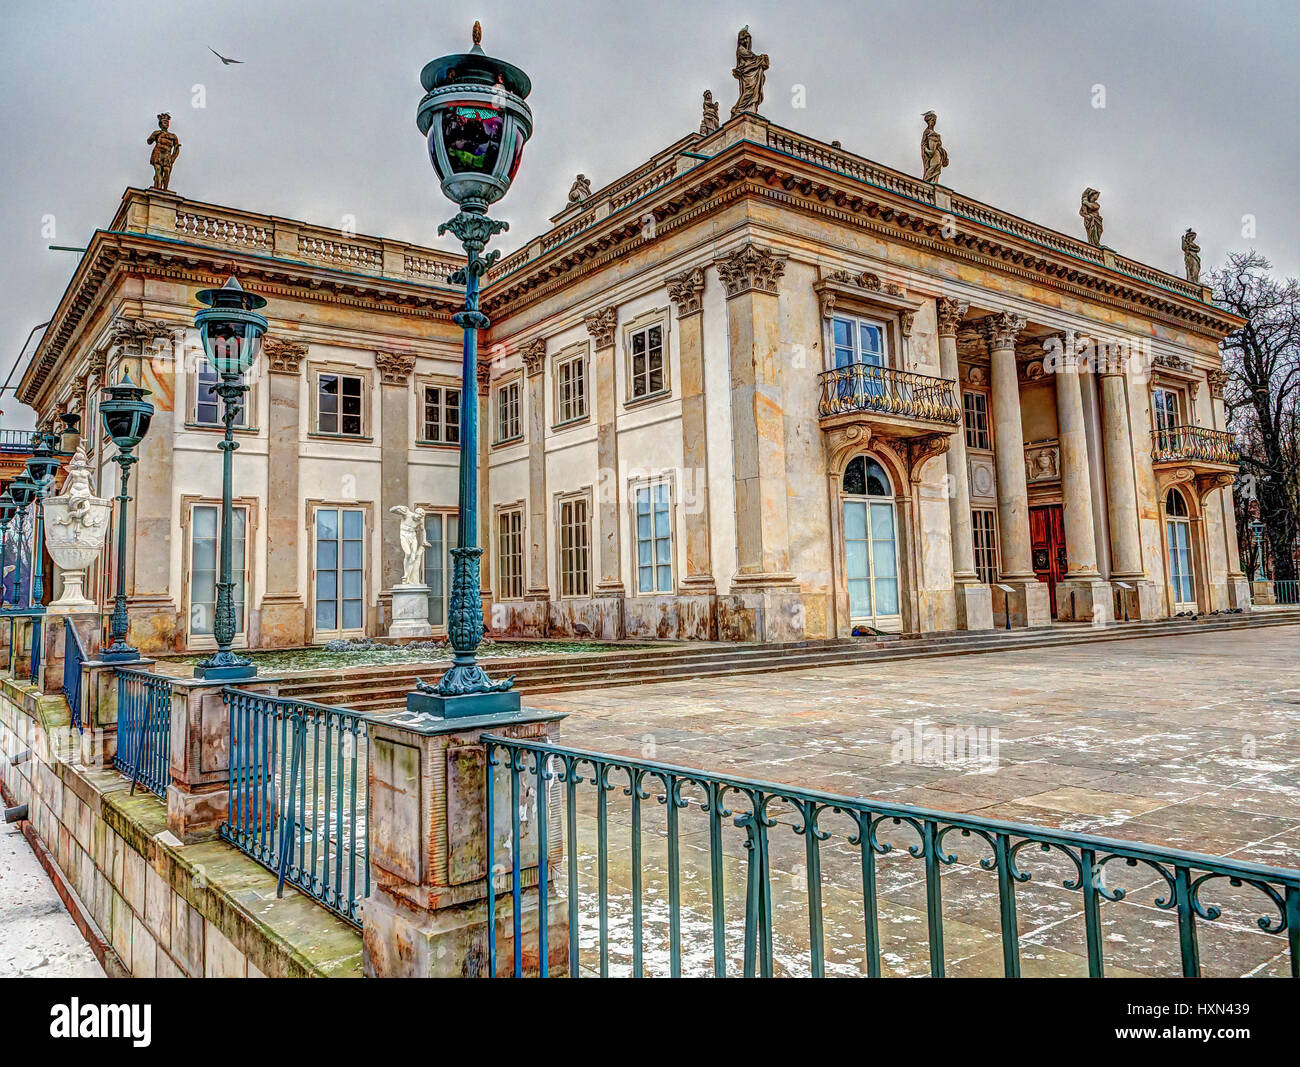 Warsaw, Poland - January 01, 2016: A The ” Palace on water” in Royal “ Lazienki” park in a winter scene Stock Photo